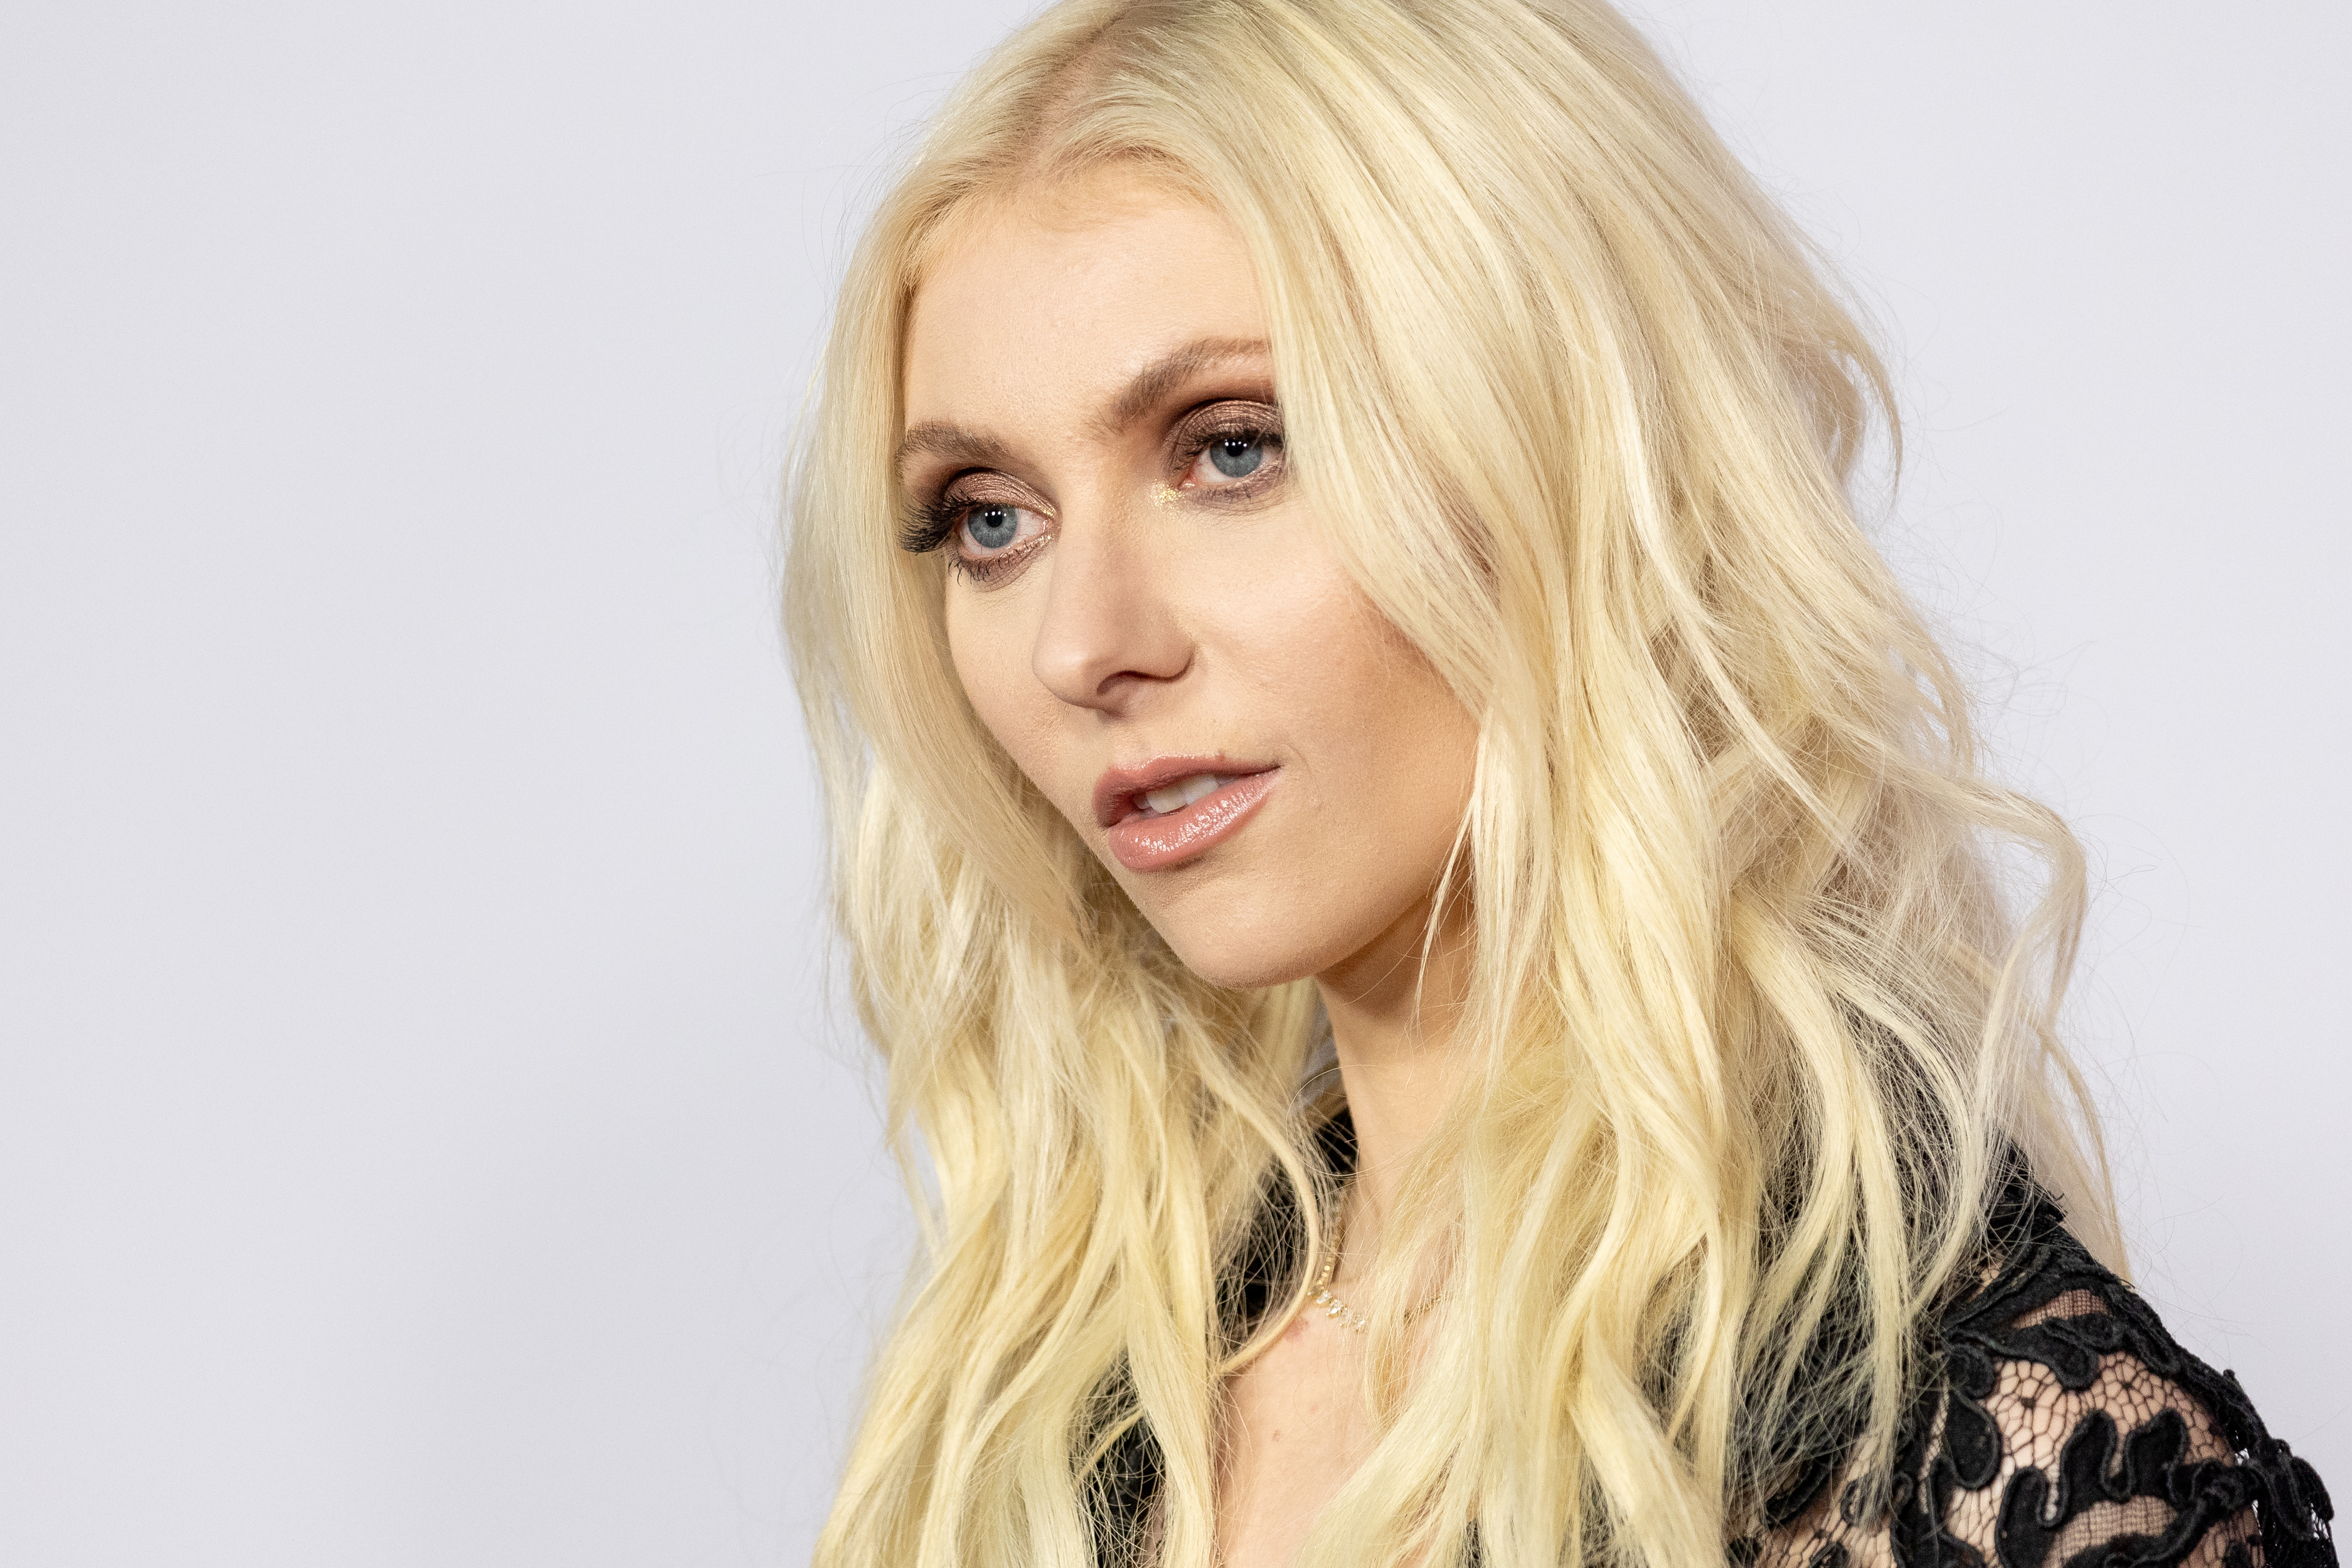 Momsen has effectively retired from acting to concentrate on music